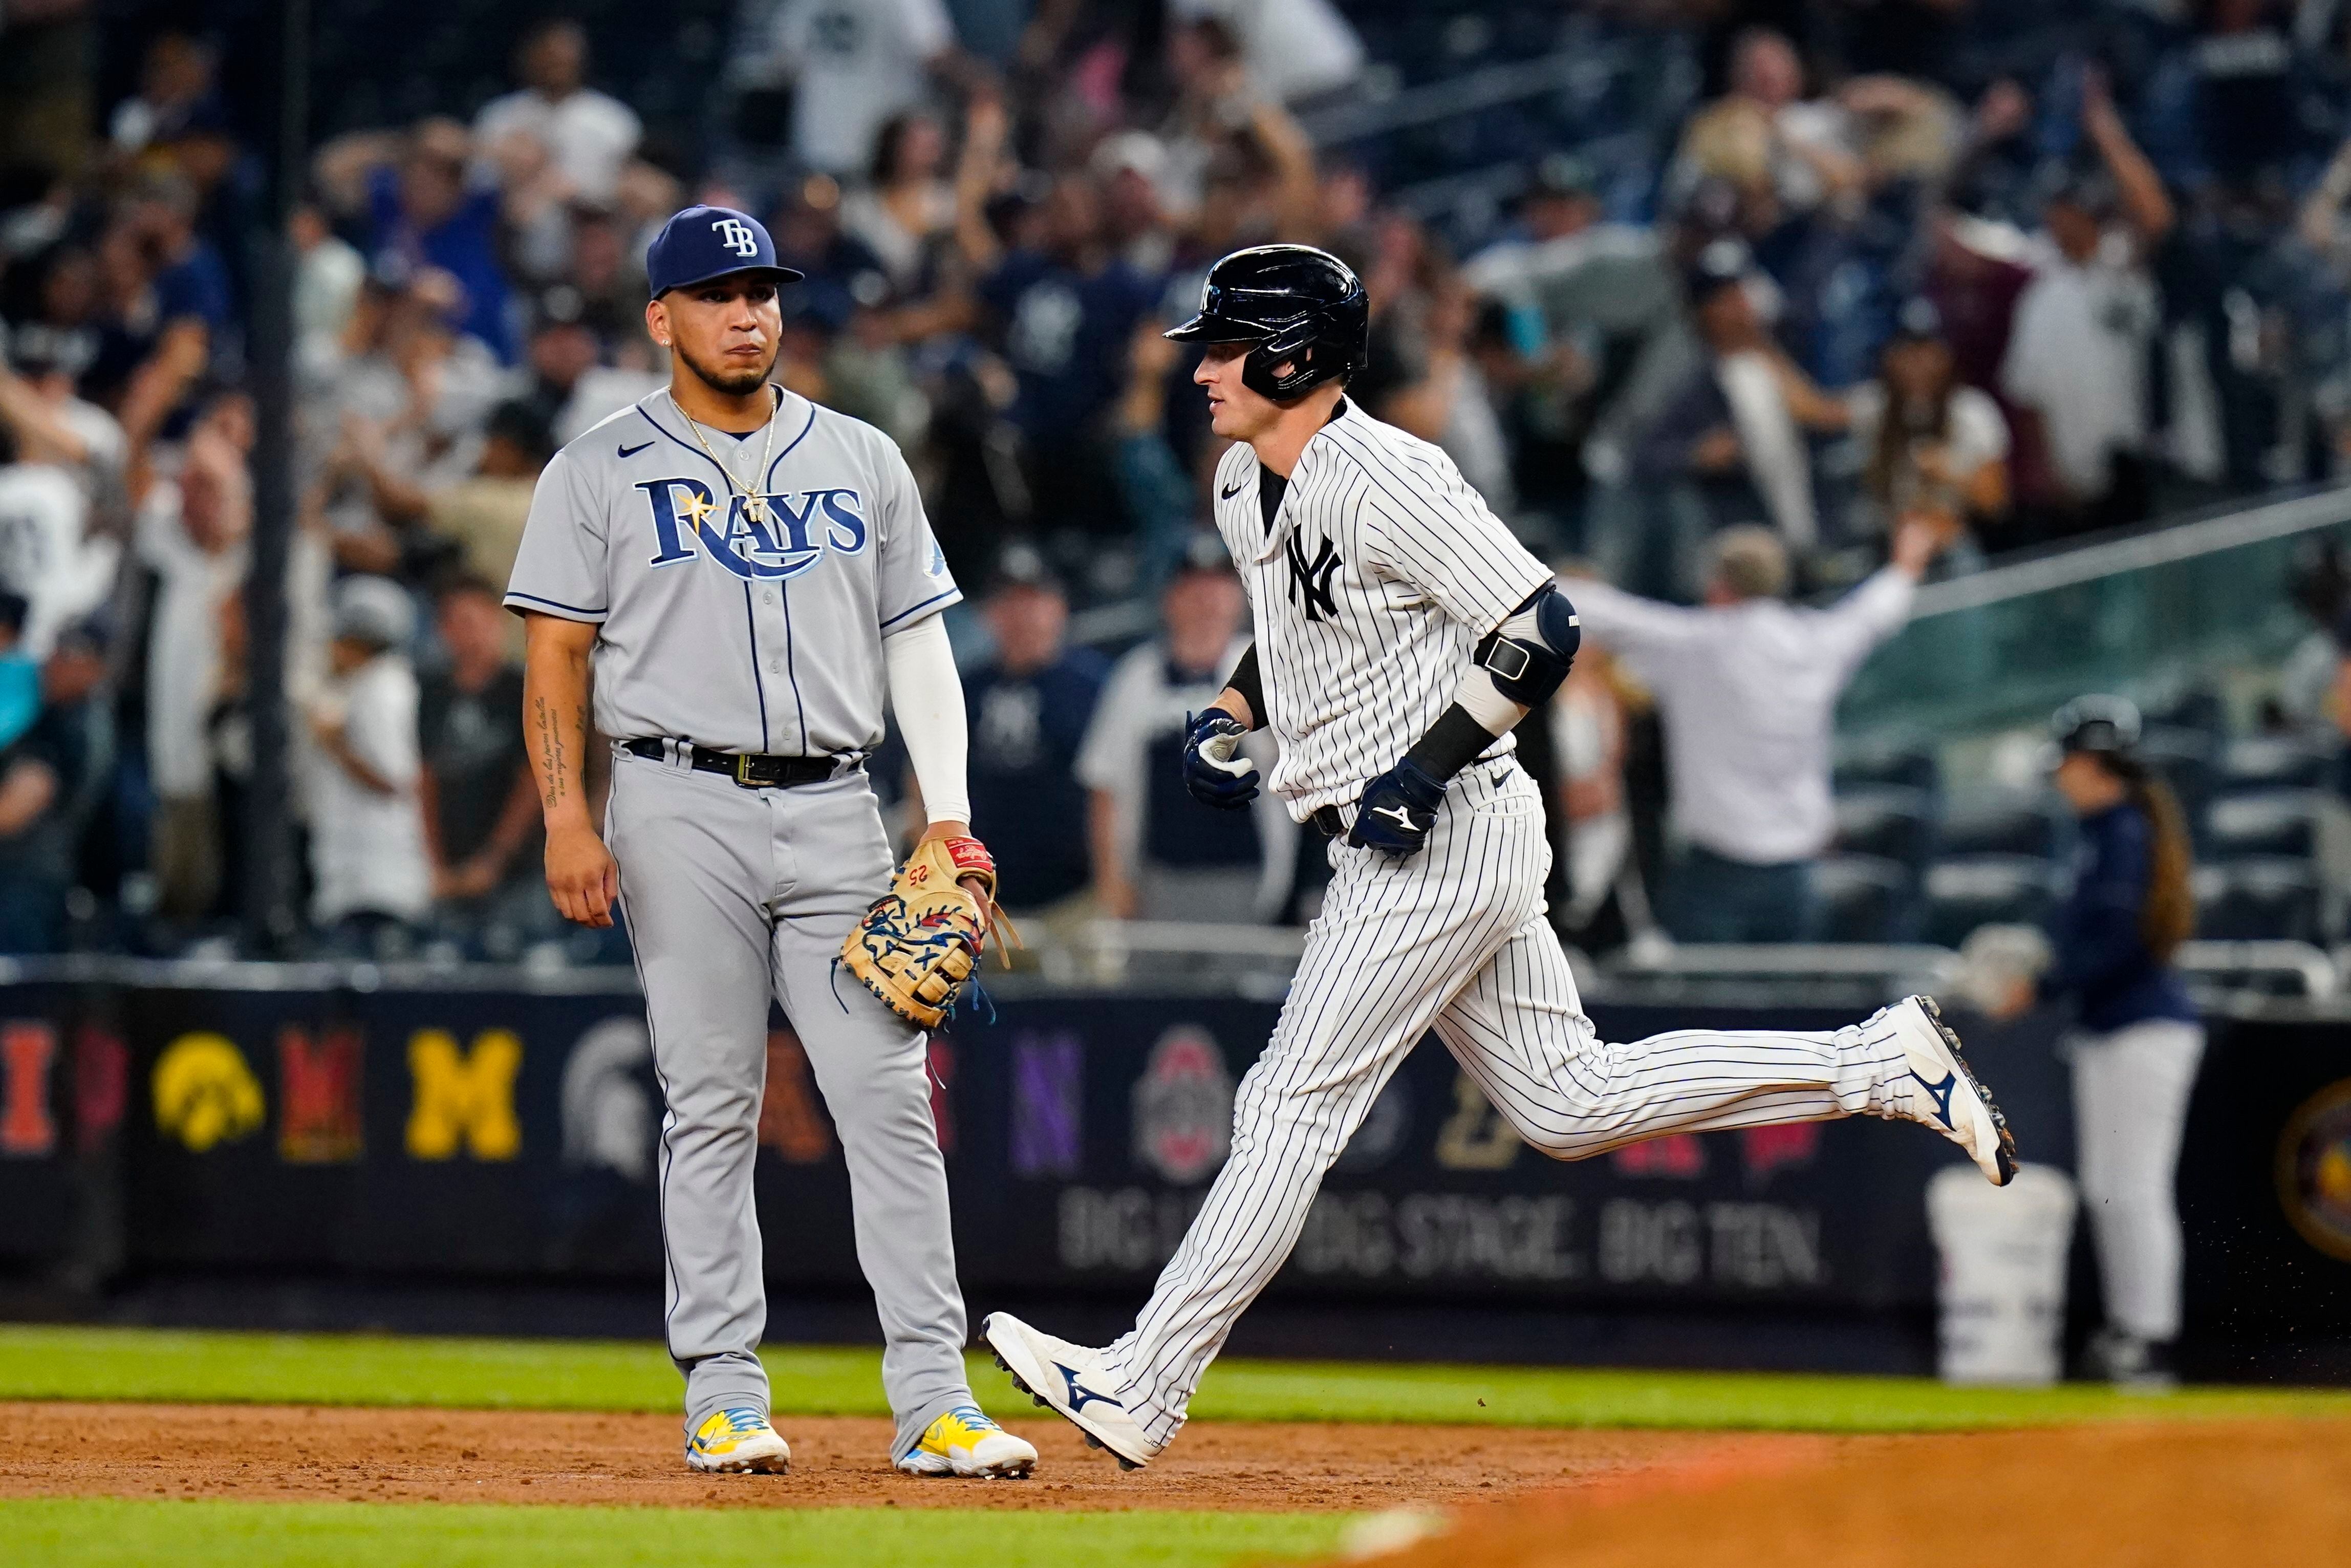 Frelick leaping catch preserves no-hit bid in 10th, Yankees and